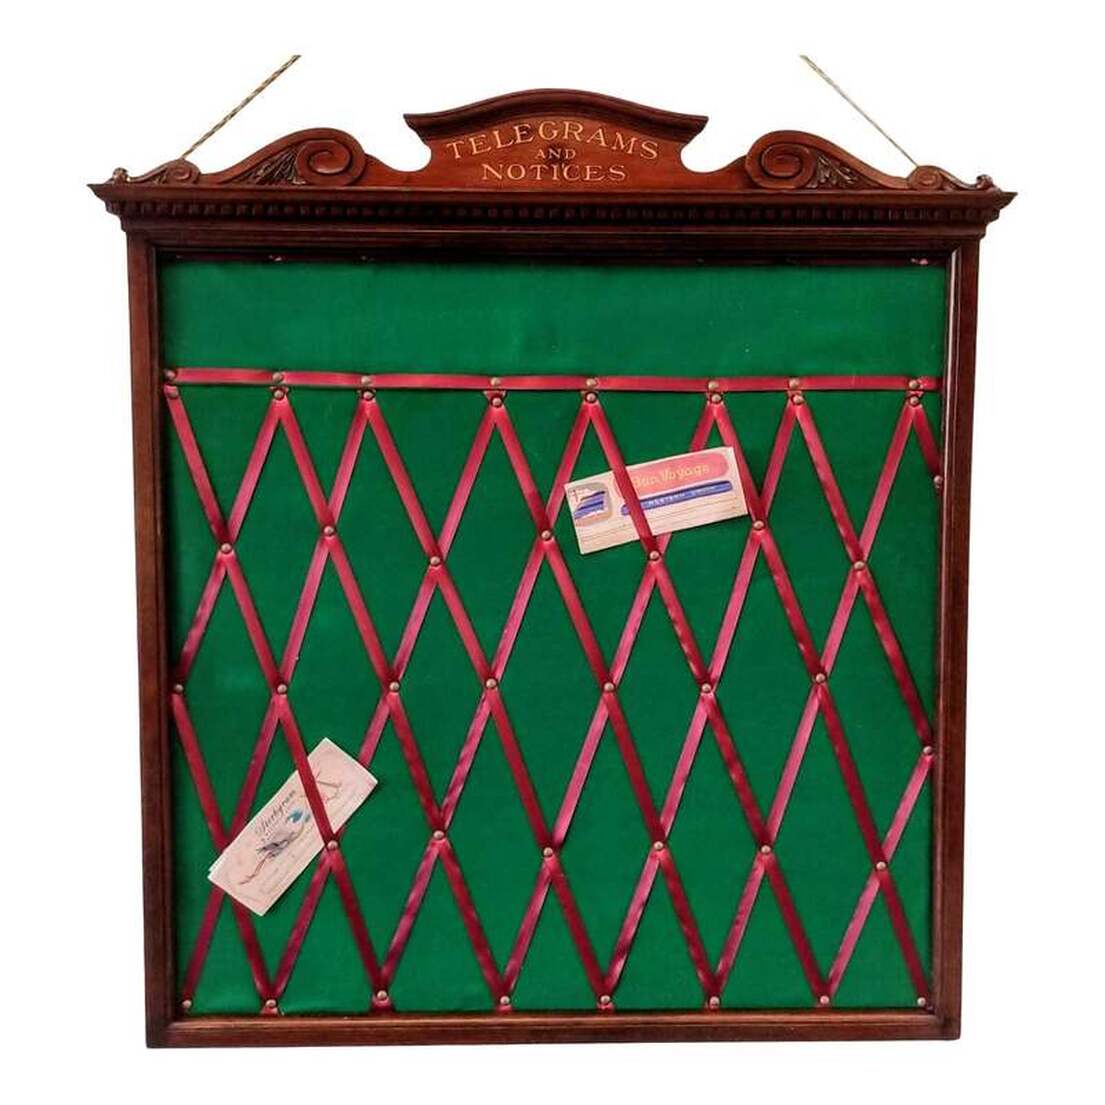 Telegrams and Notices board from late-Victorian England.Neoclassical style mahogany wood frame surrounds a center of new felt and ribbon. Under the bonnet top with scrolls and acanthus leaves is lettering spelling 